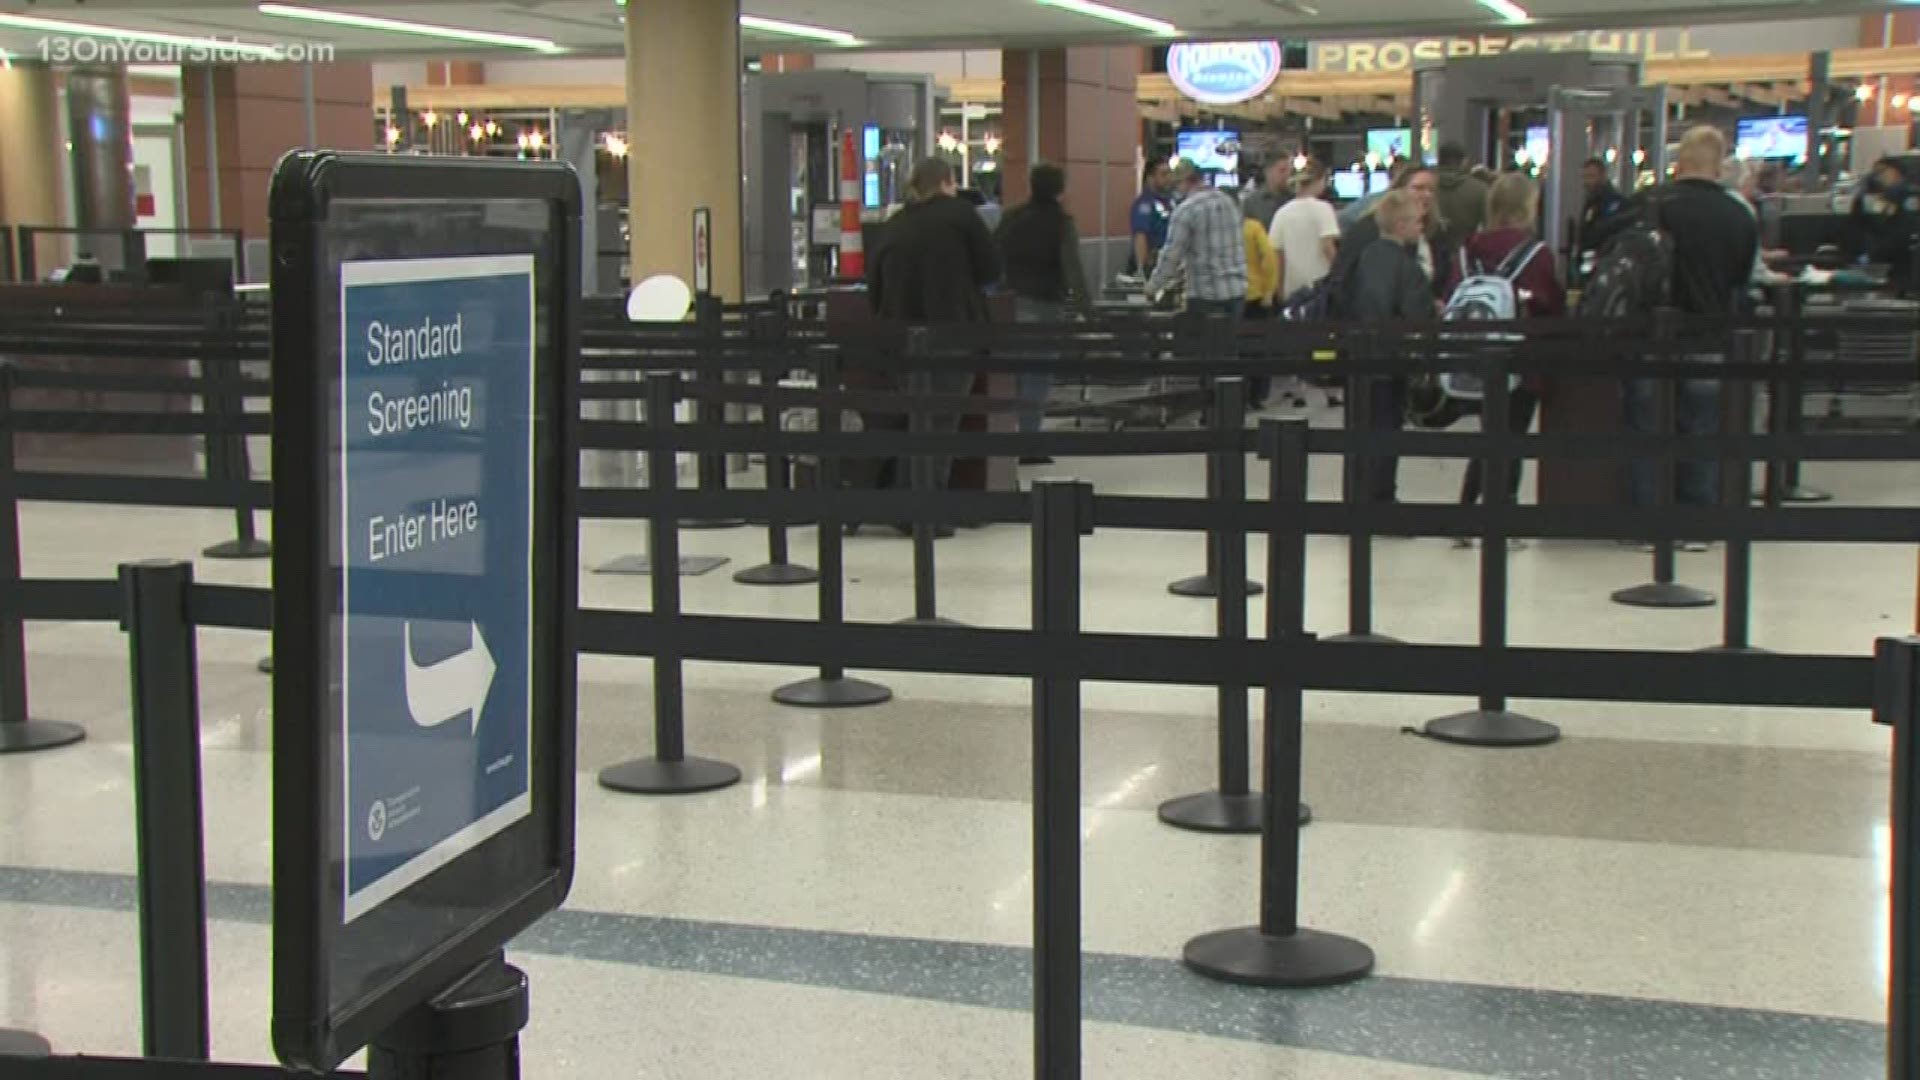 With the holidays approaching, airports are getting busier.